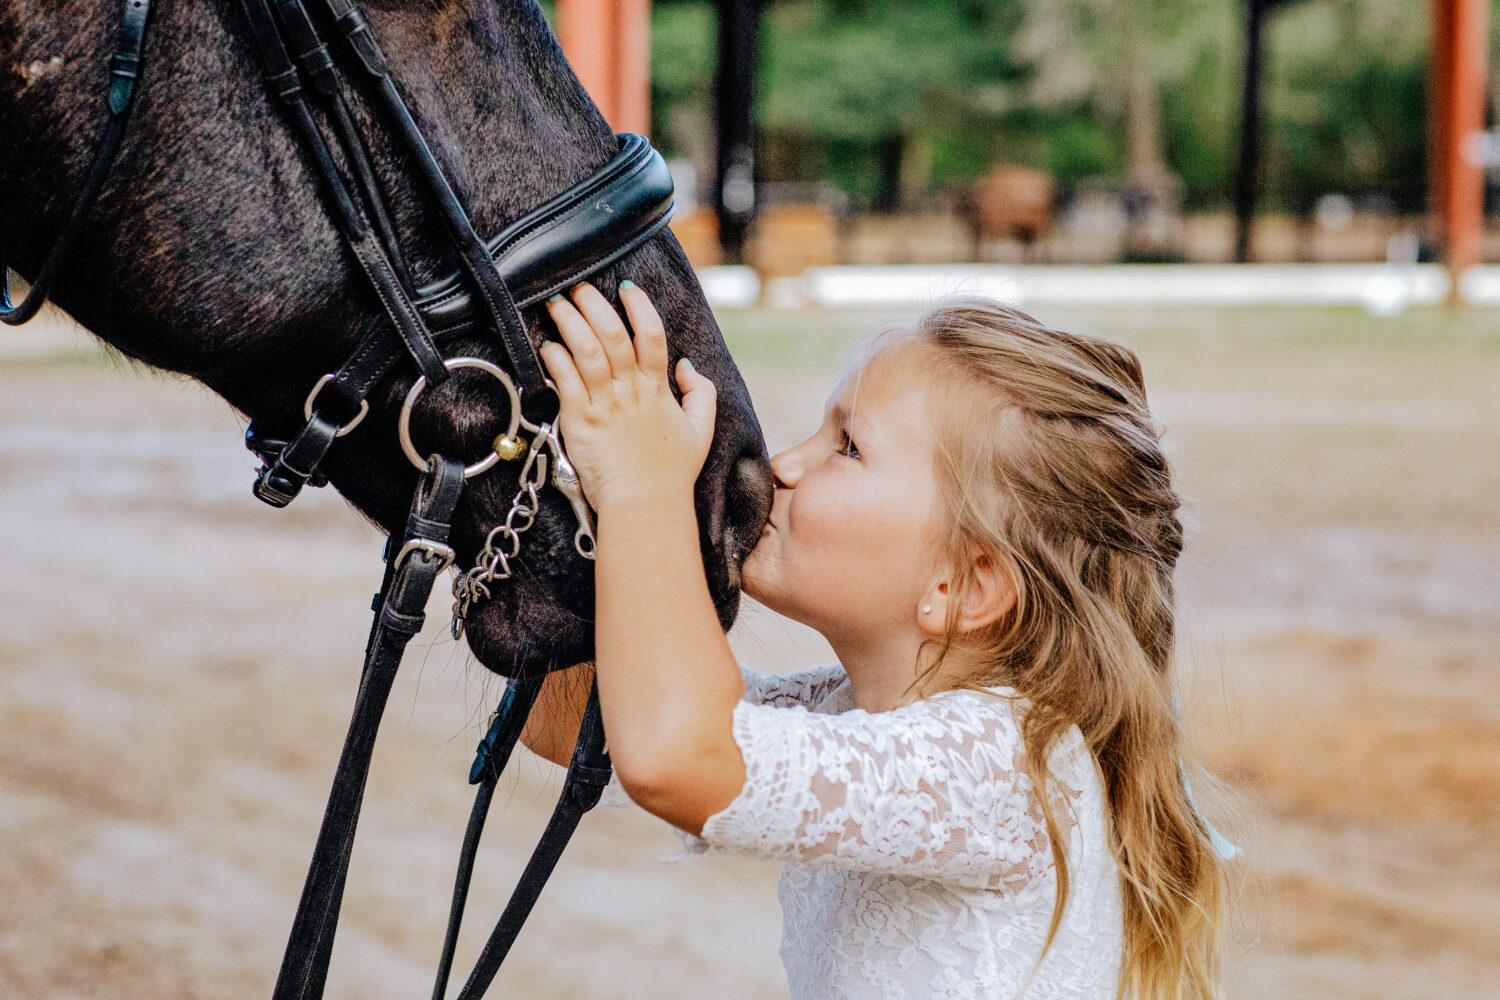 Little girls kissing a horse on his nose